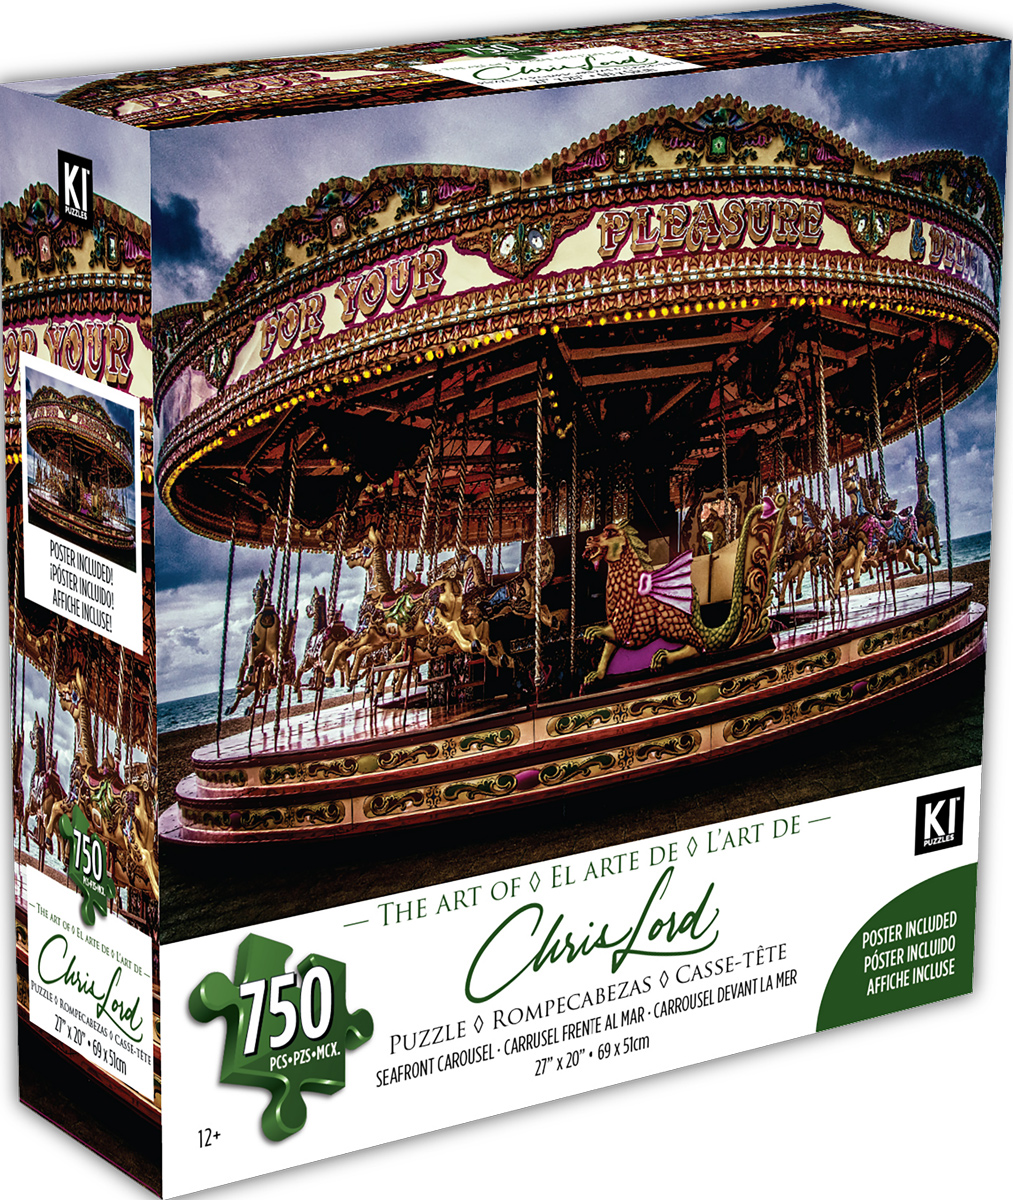 Seafront Carousel